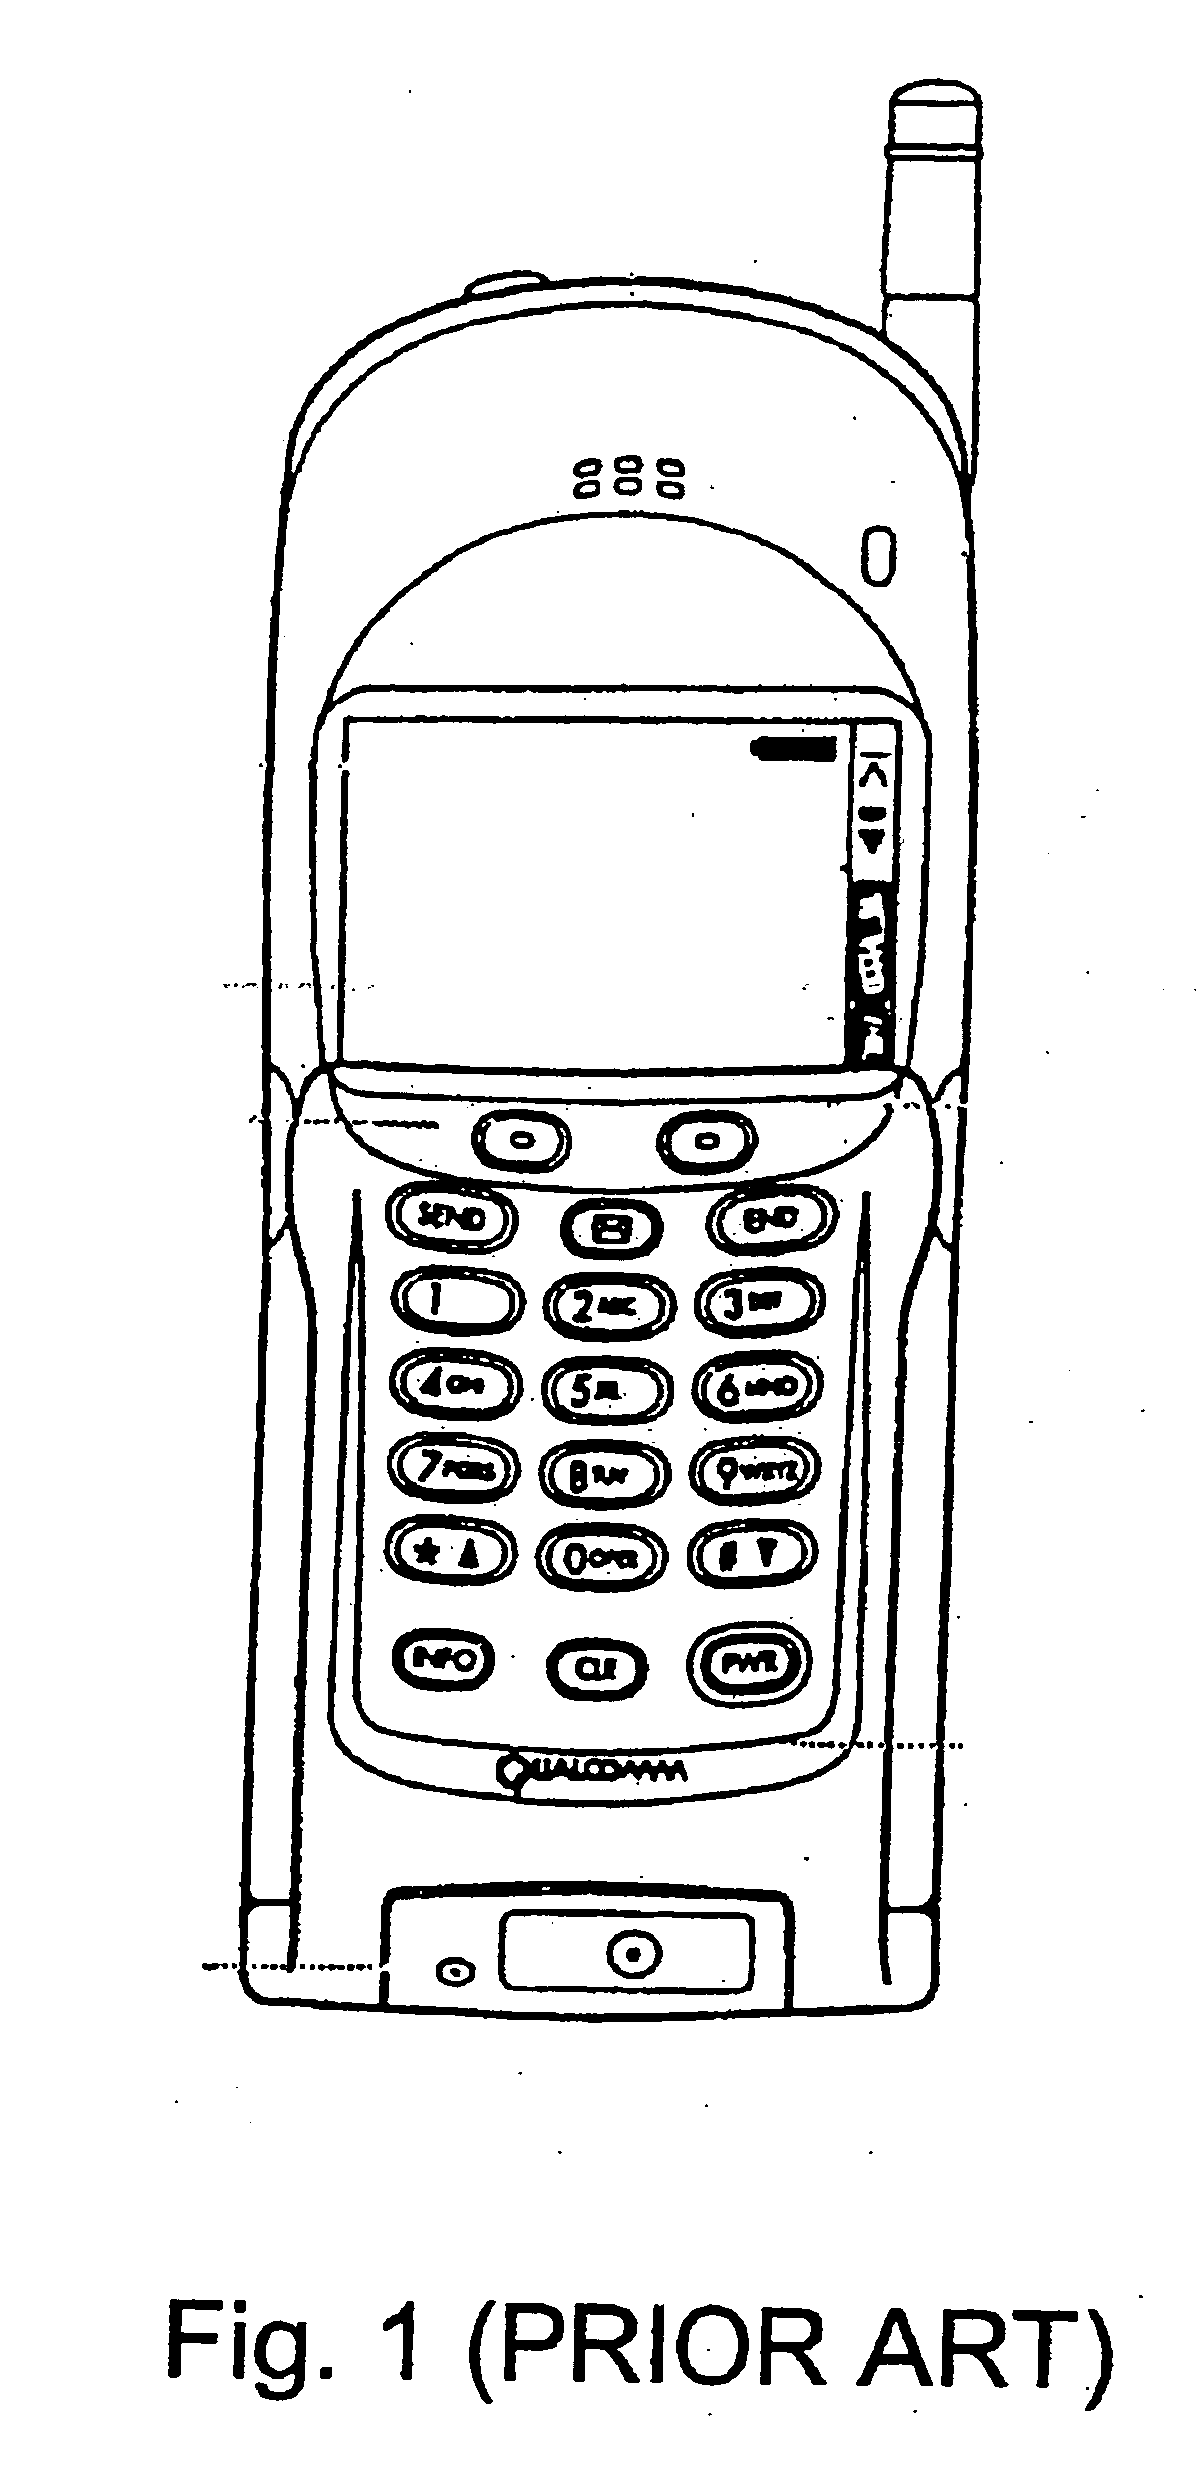 Integrated handheld computing and telephony system and services